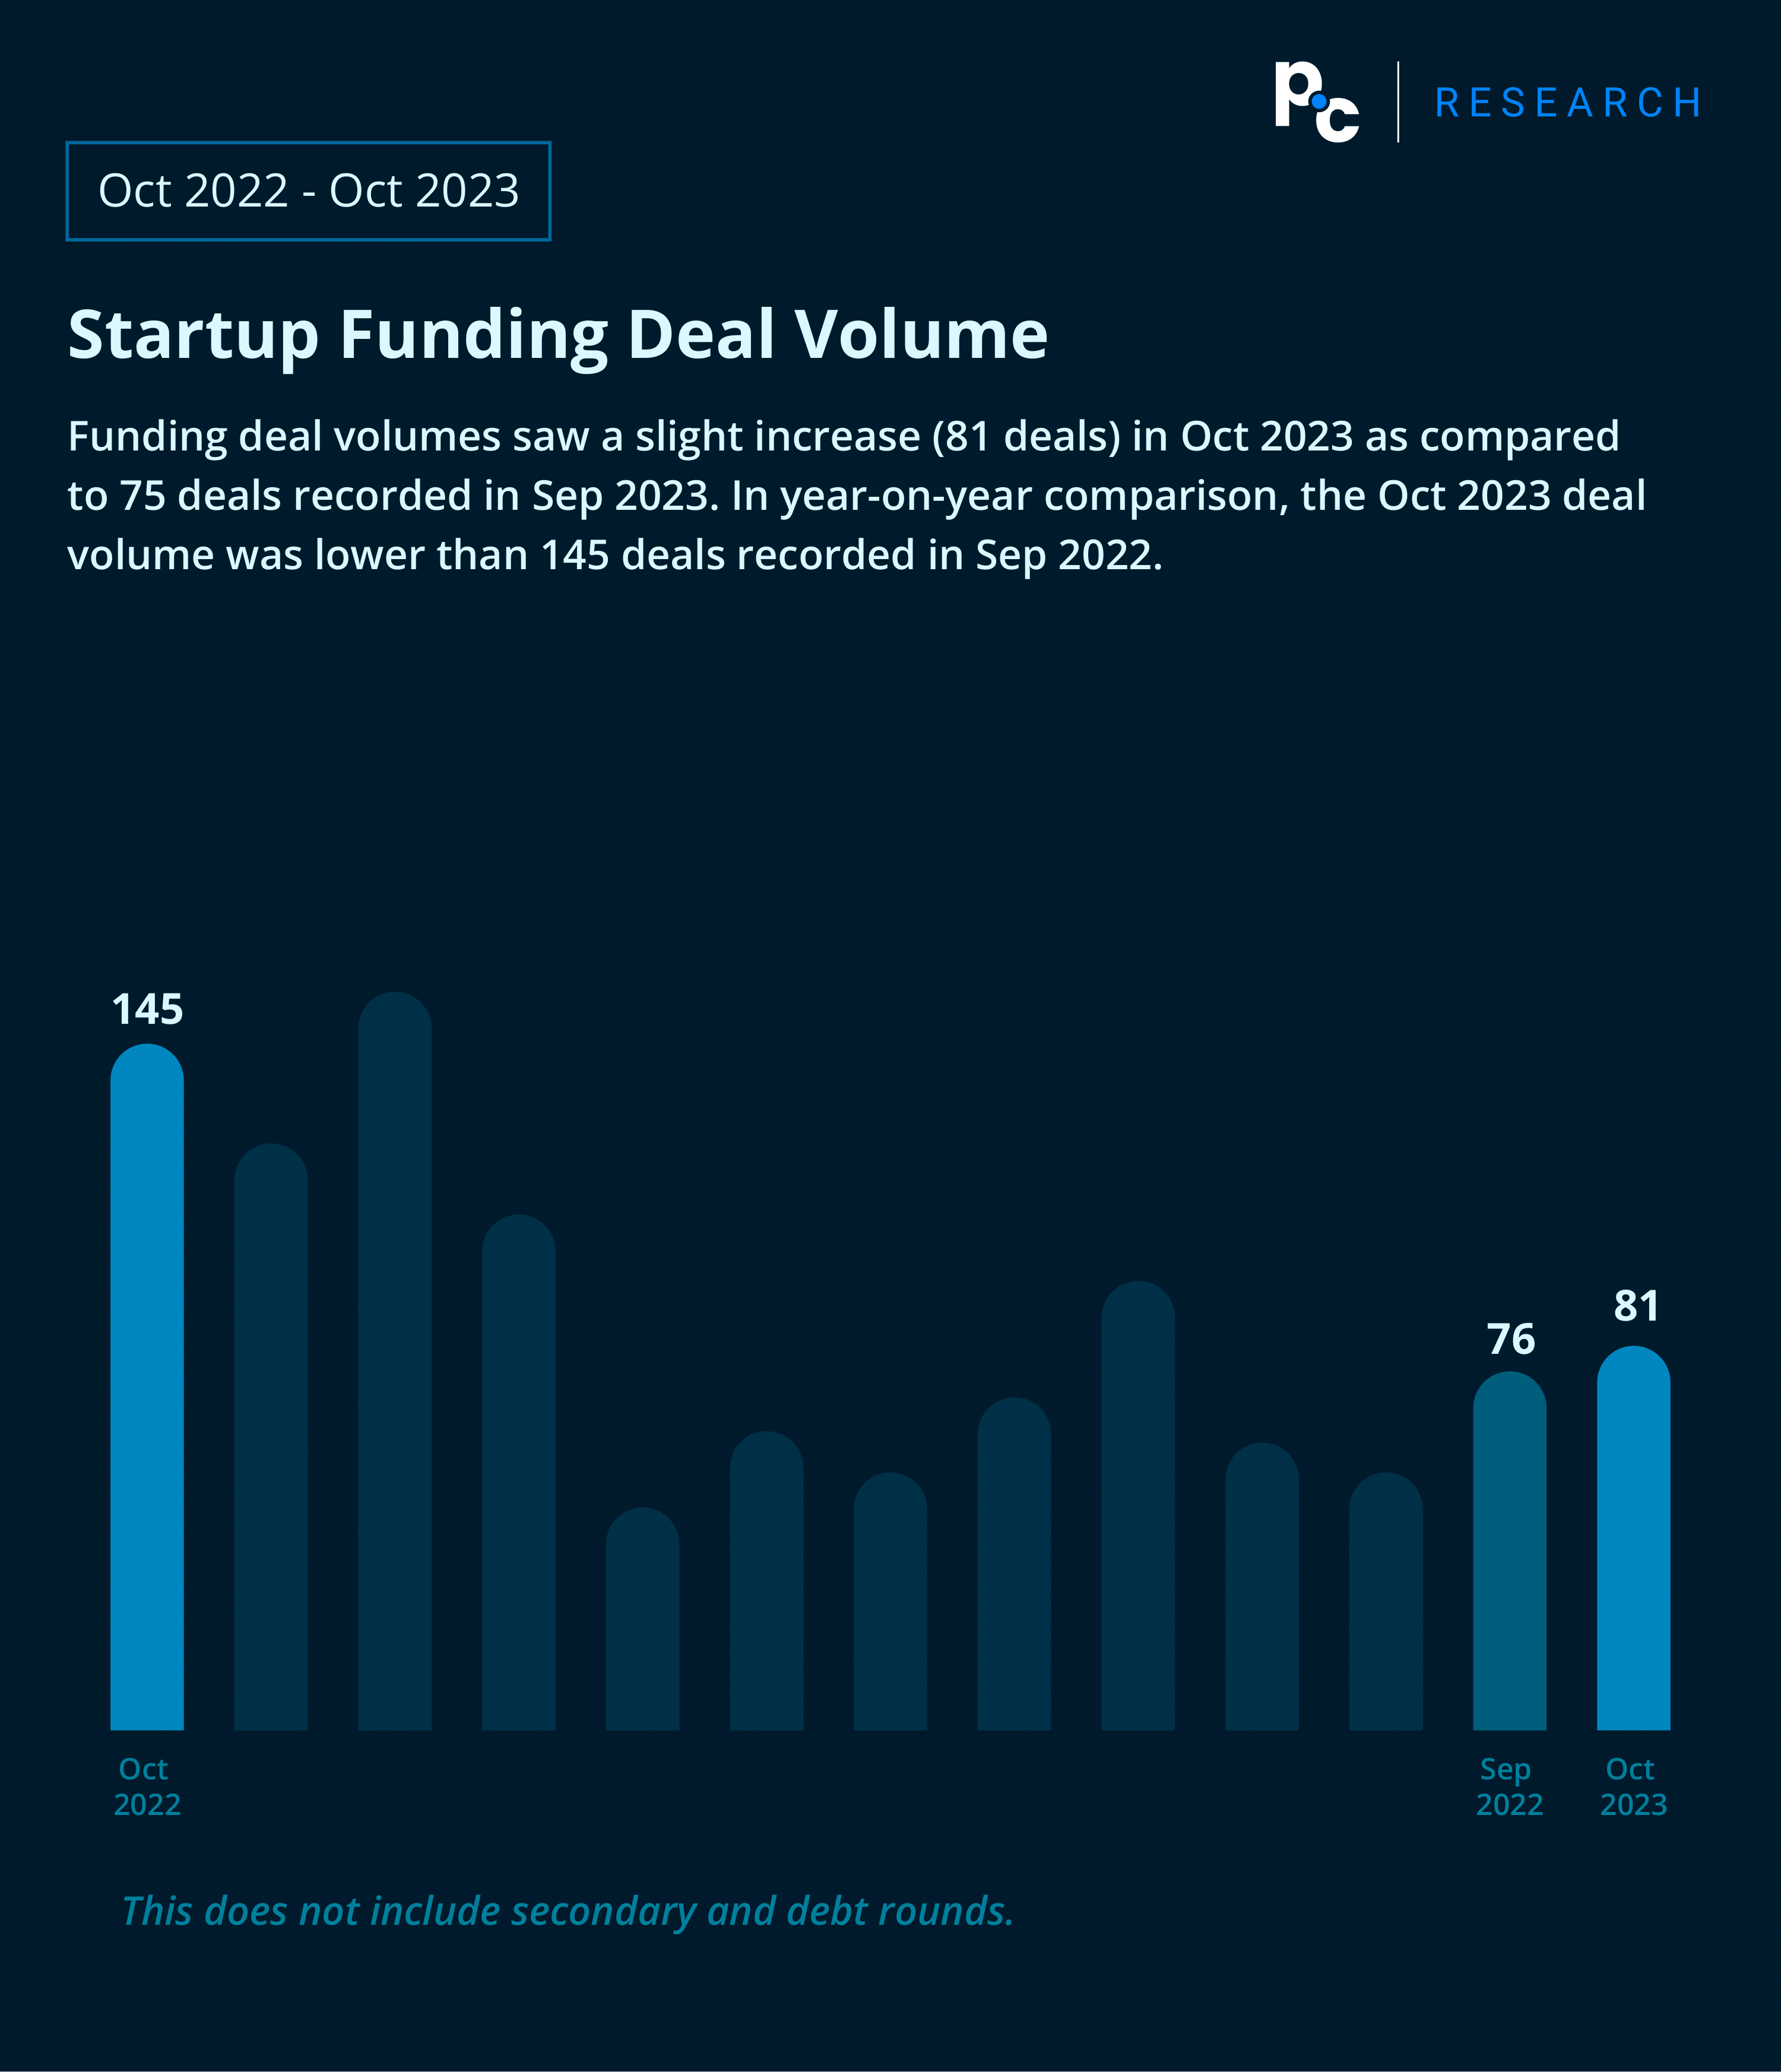 October 2023: Startup Funding Deal Volume (Oct 2022 - Oct 2023).

Funding deal volumes saw a slight increase (81 deals) in Oct 2023 as compared to 75 deals recorded in Sep 2023. In year-on-year comparison, the Oct 2023 deal volume was lower than 145 deals recorded in Sep 2022.
This does not include debt and secondary rounds. 
